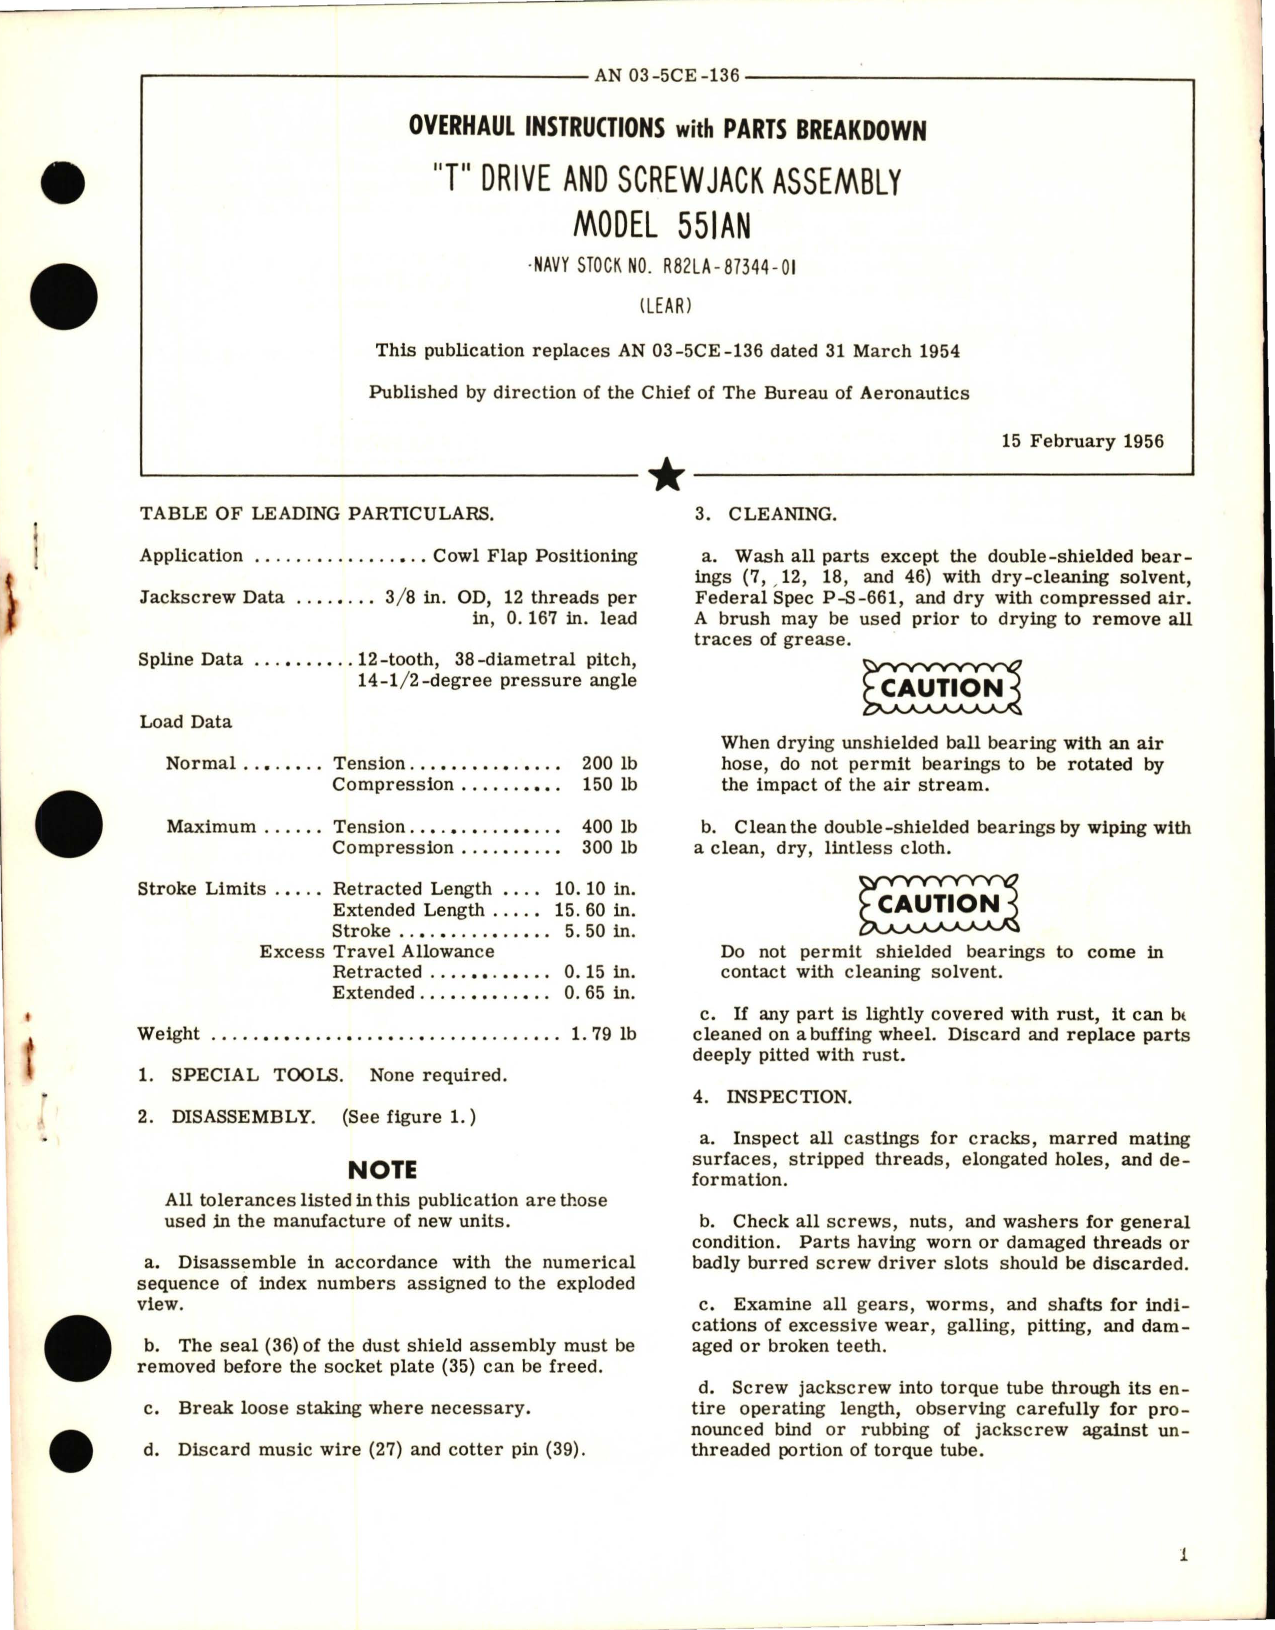 Sample page 1 from AirCorps Library document: Overhaul Instructions with Parts Breakdown for T Drive and Screwjack Assembly - Model 551AN 